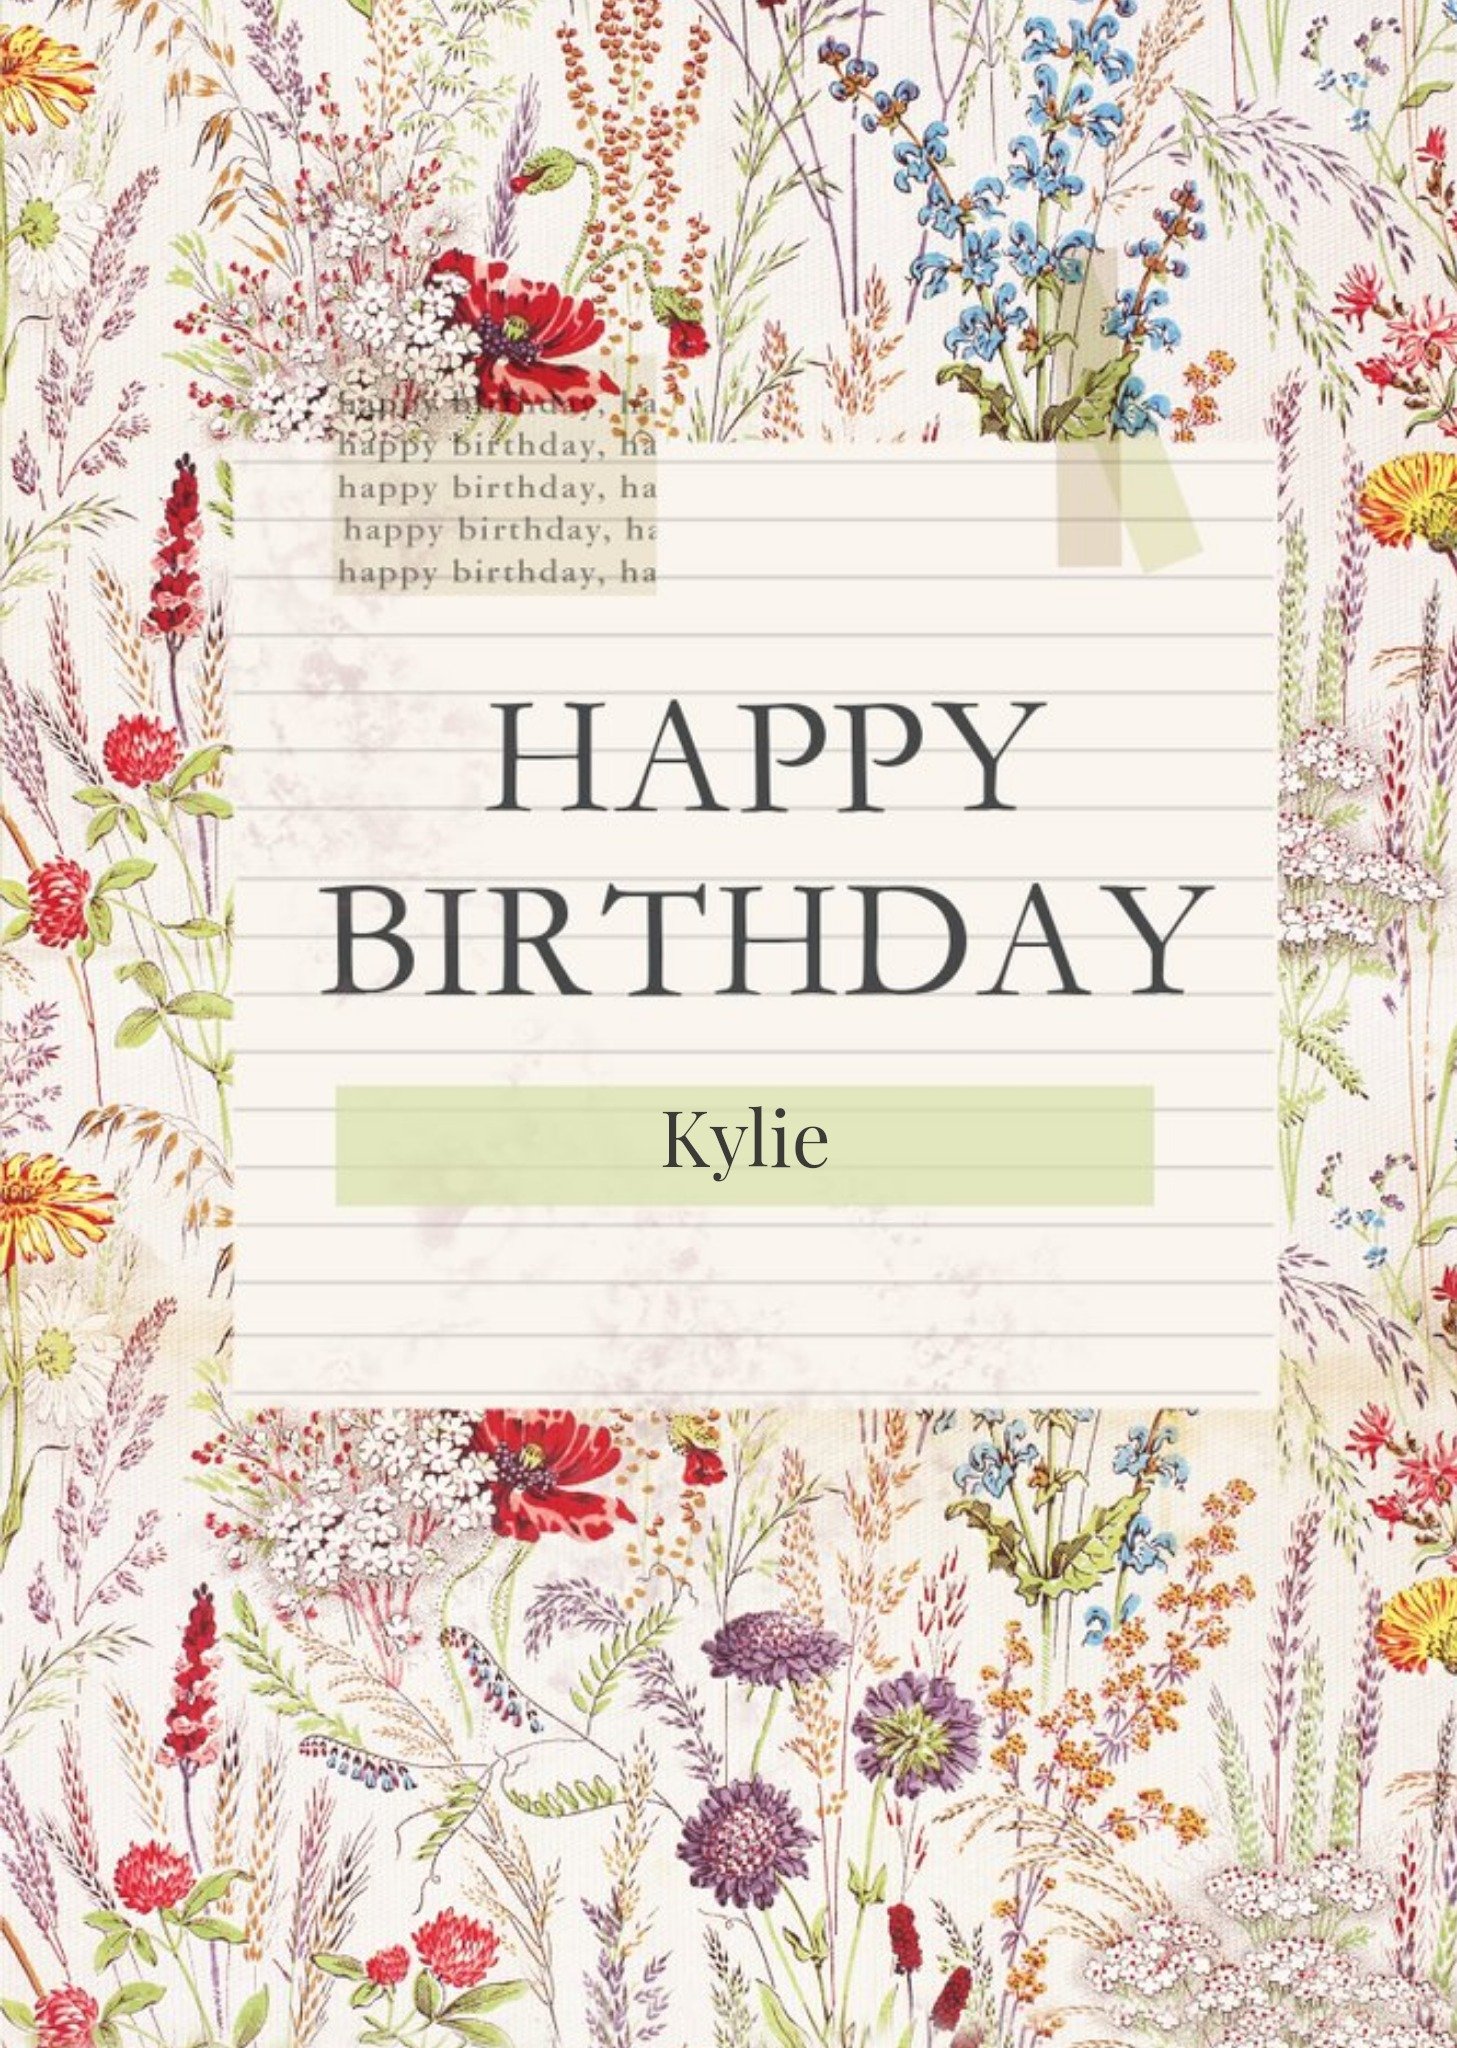 The V&a V&a Floral Pattern Collage Birthday Card, Large